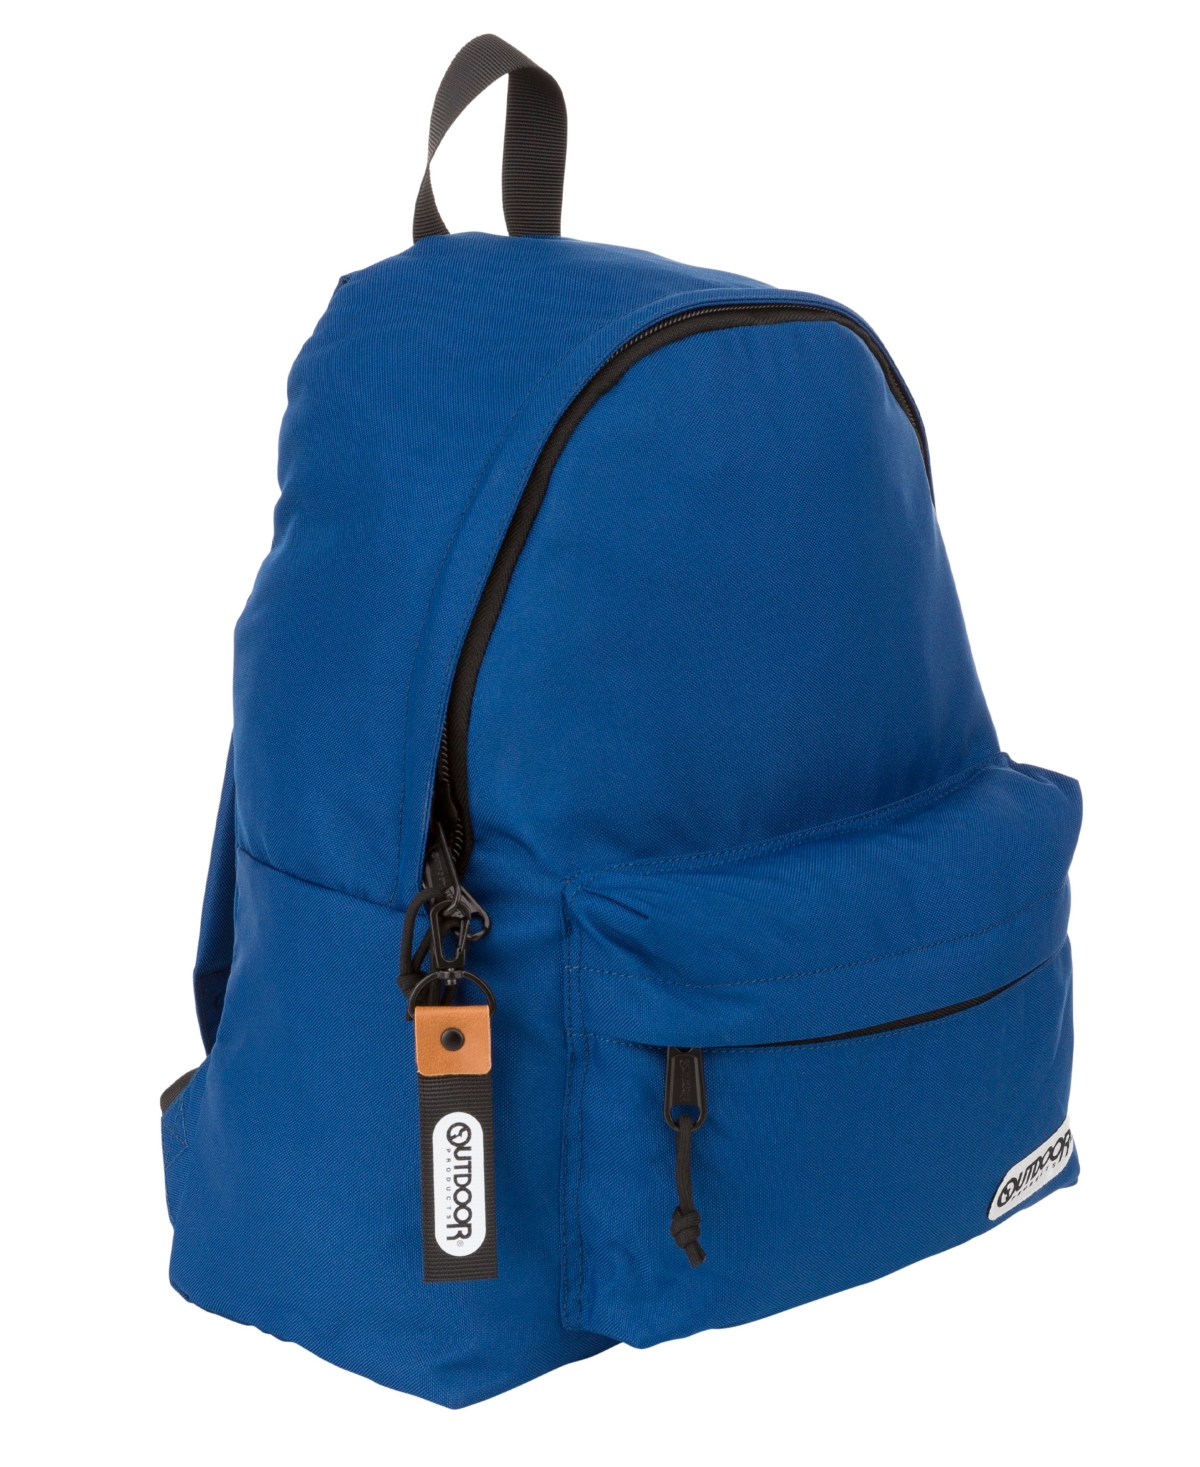 Outdoor Products New Generation Backpack In Navy